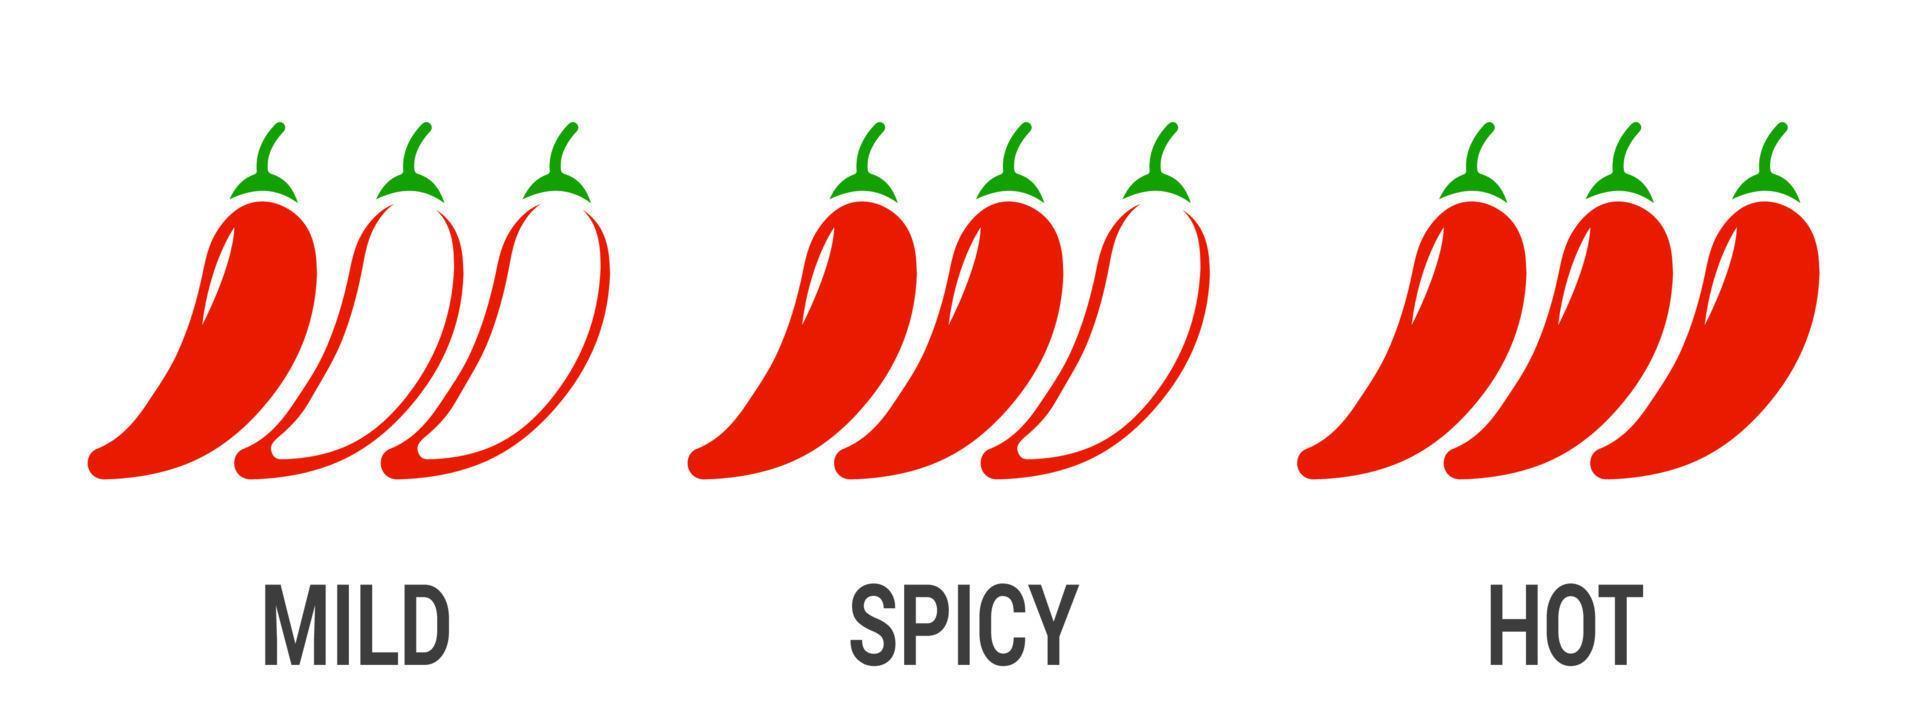 Spicy chili pepper level labels. Vector spicy food mild and extra hot sauce, chili pepper red outline icons. EPS 10